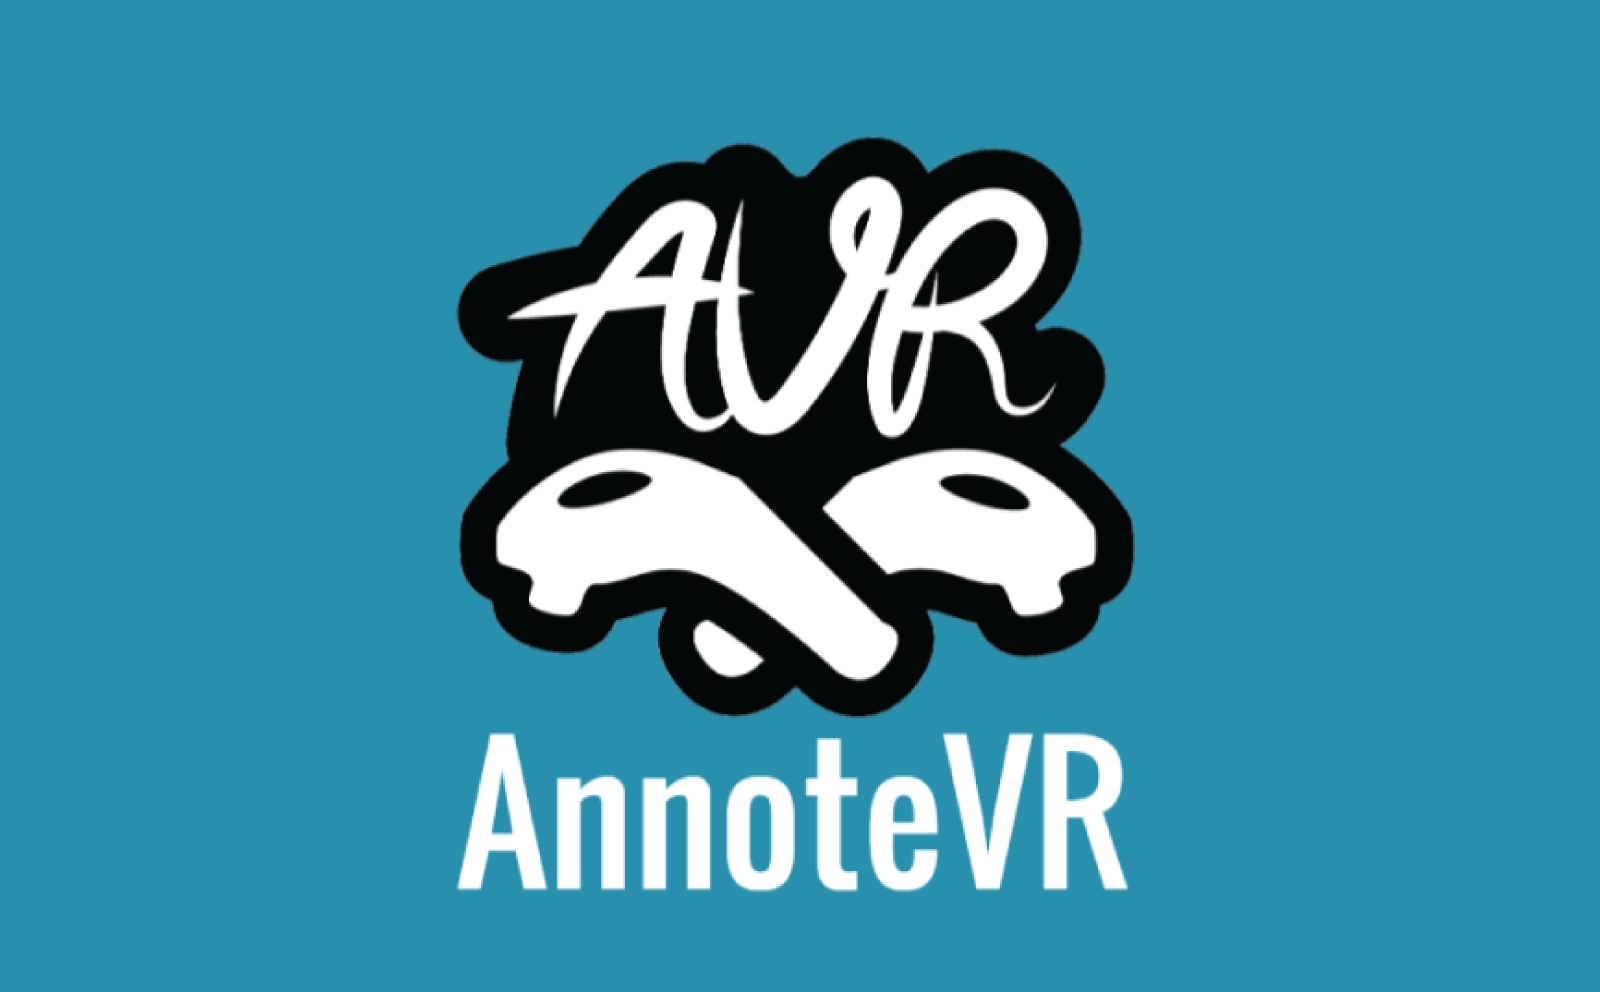 annotevr project